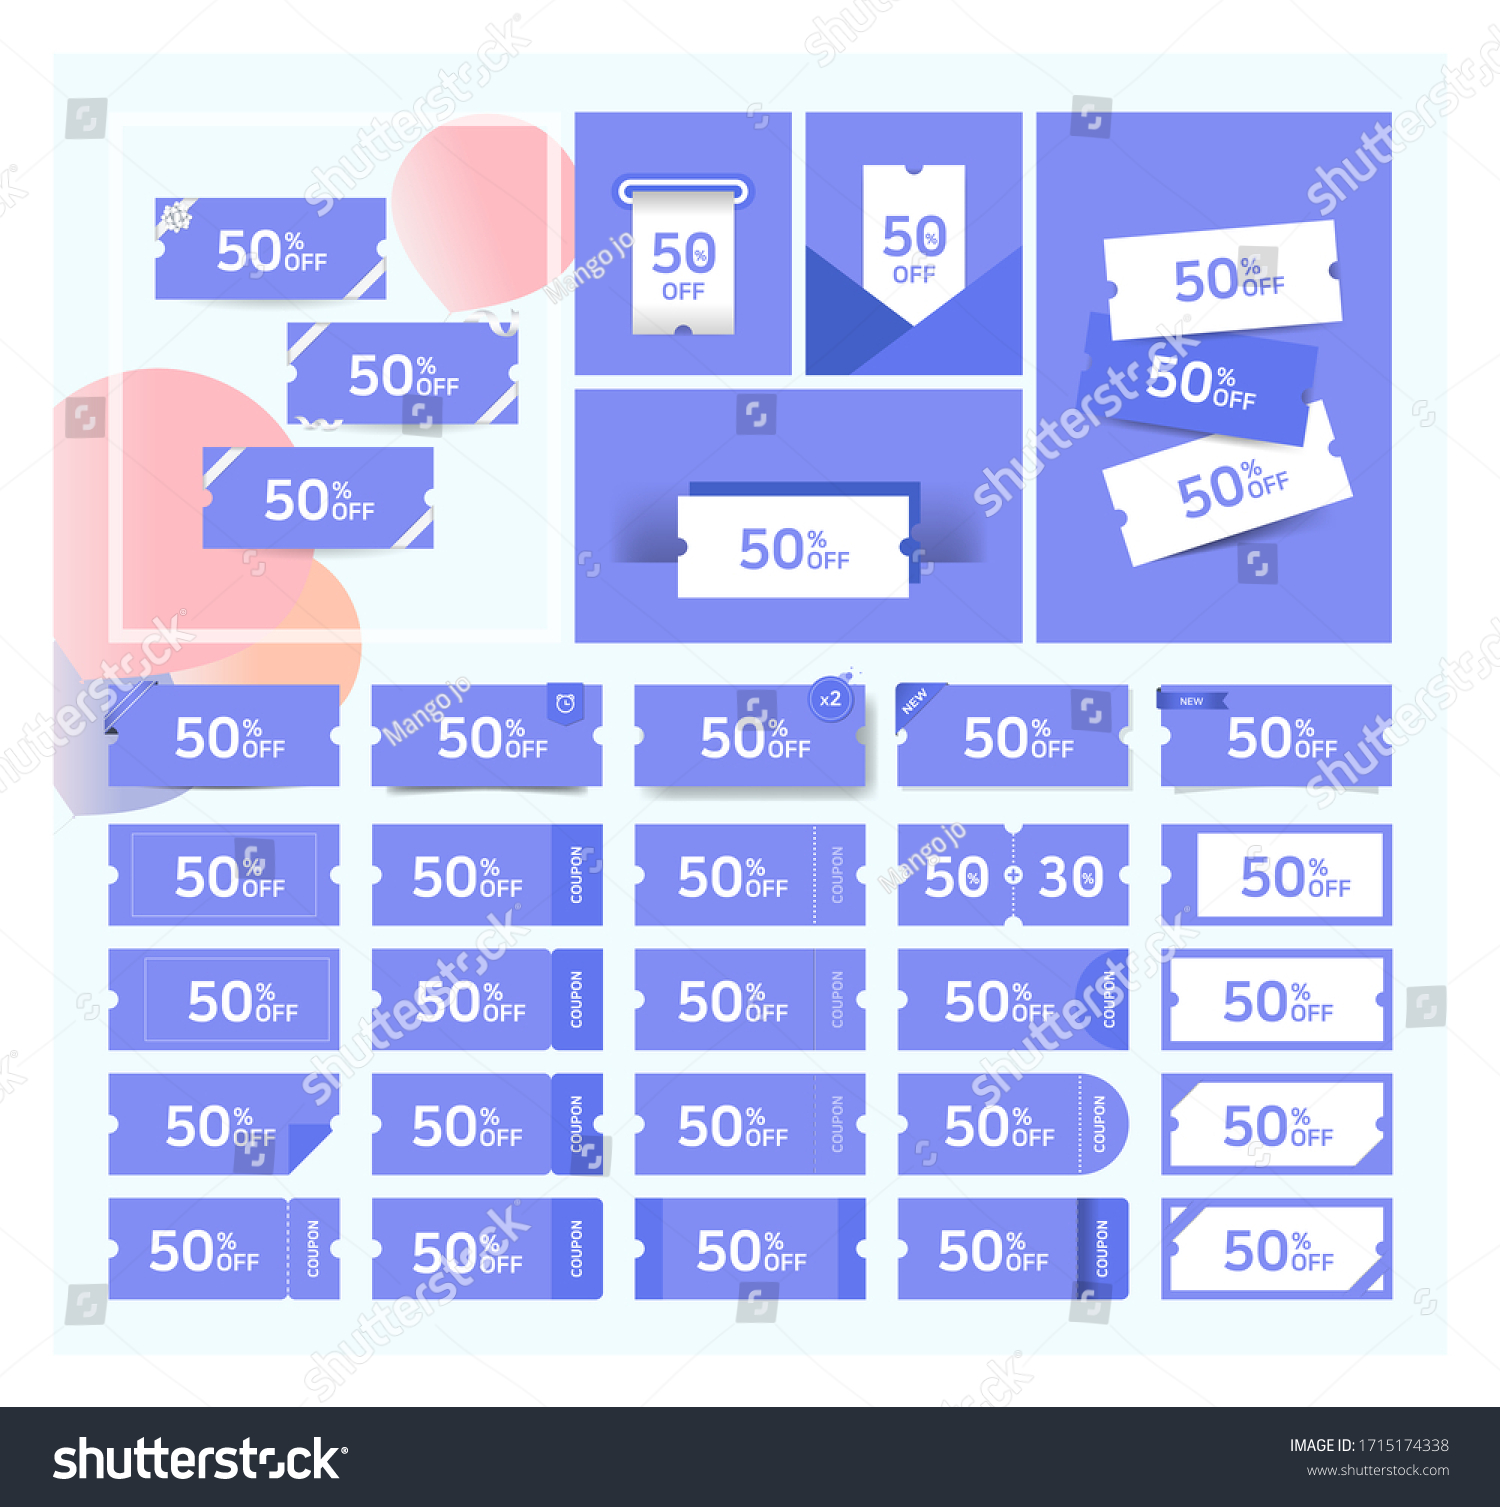 Sales Ticket Template from image.shutterstock.com